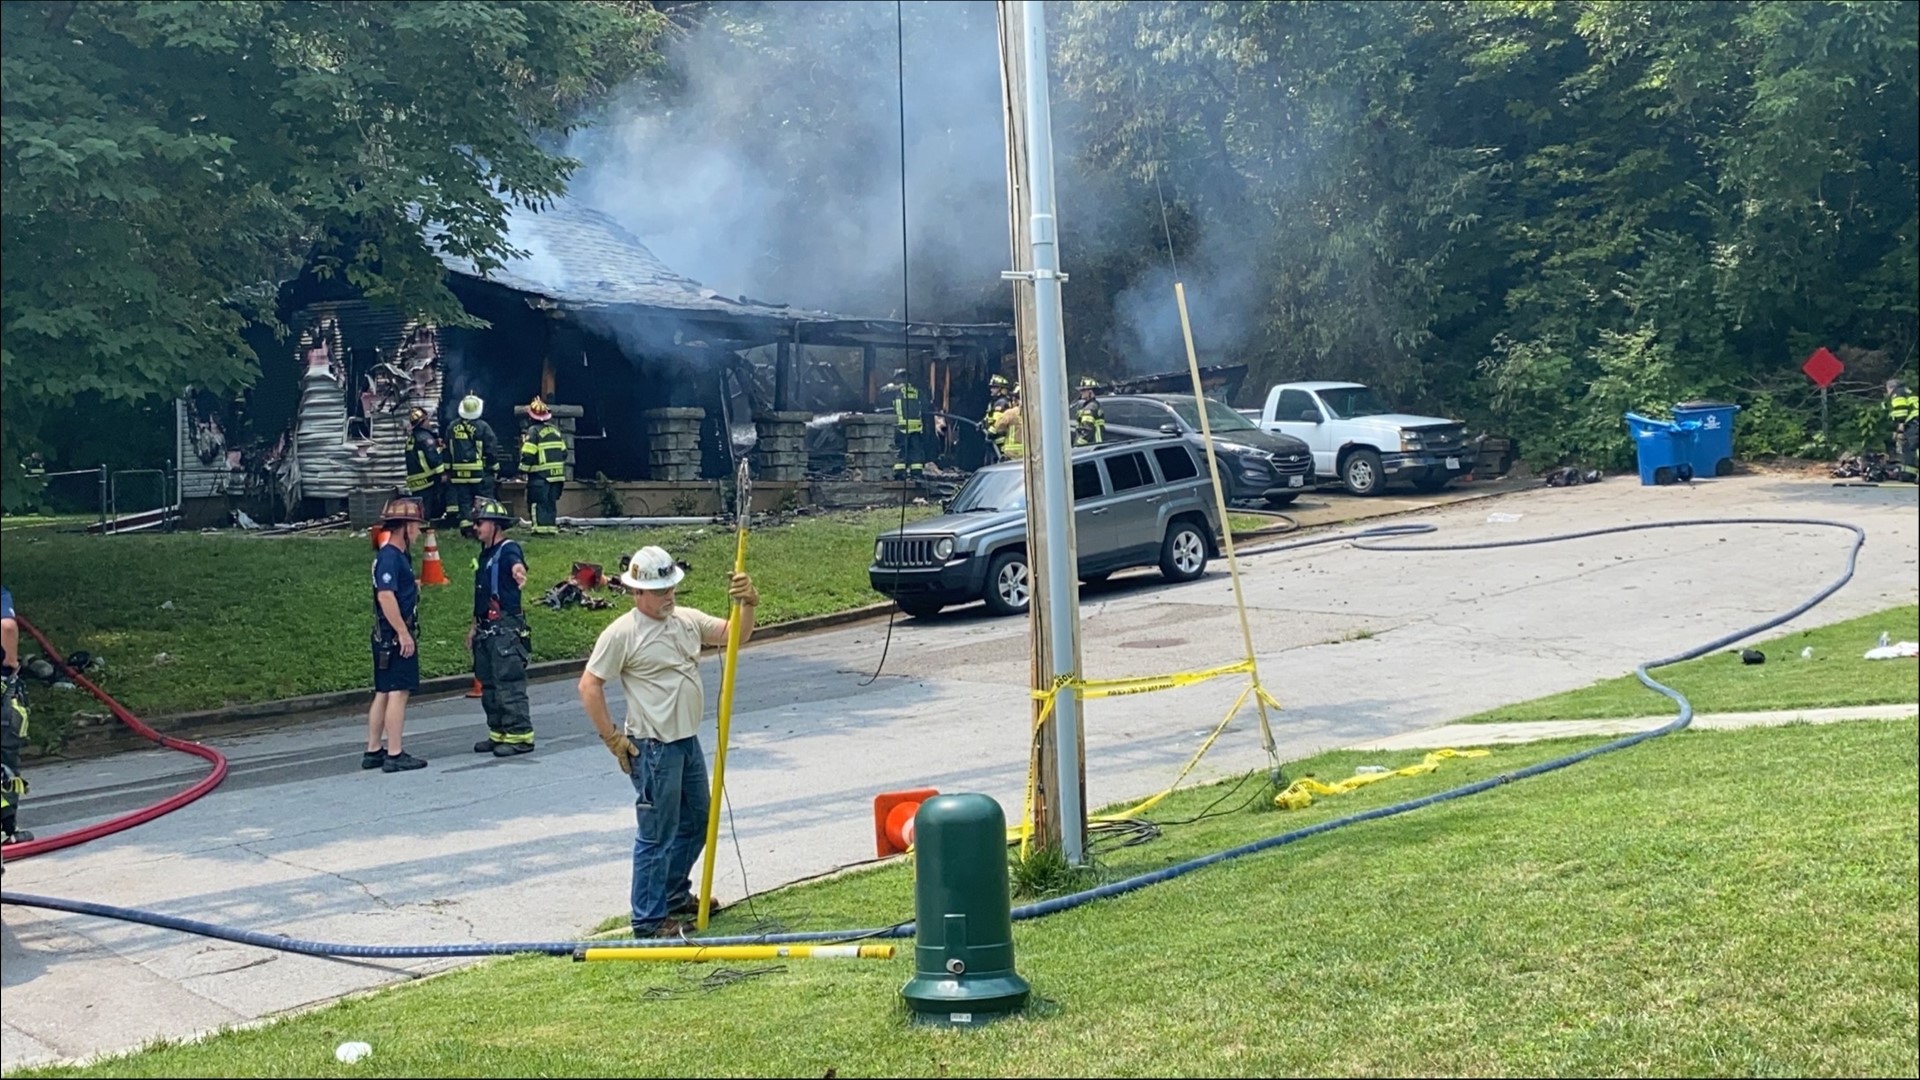 Three adults and two small children were taken to the hospital for treatment after a suspected gas leak. It caused a house explosion in St. Charles Monday.